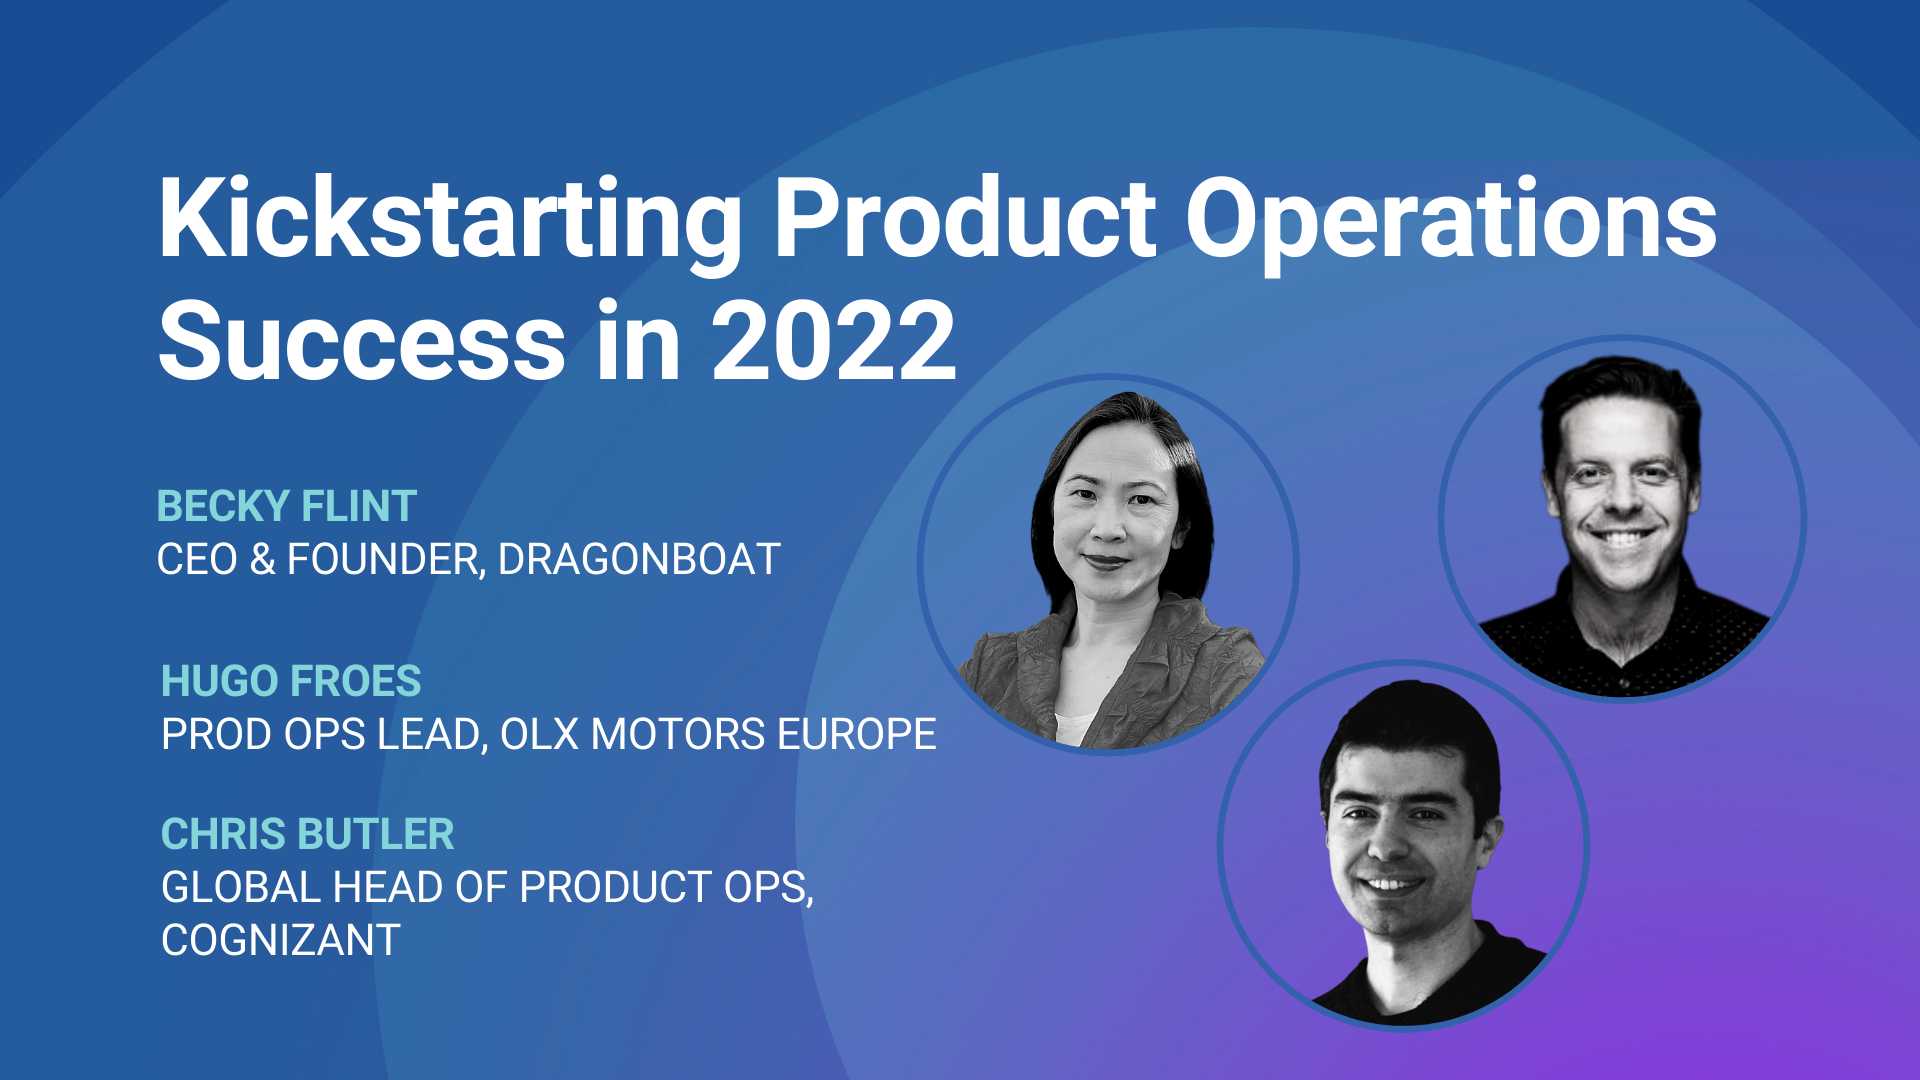 Kickstarting Product Operations Success in 2022